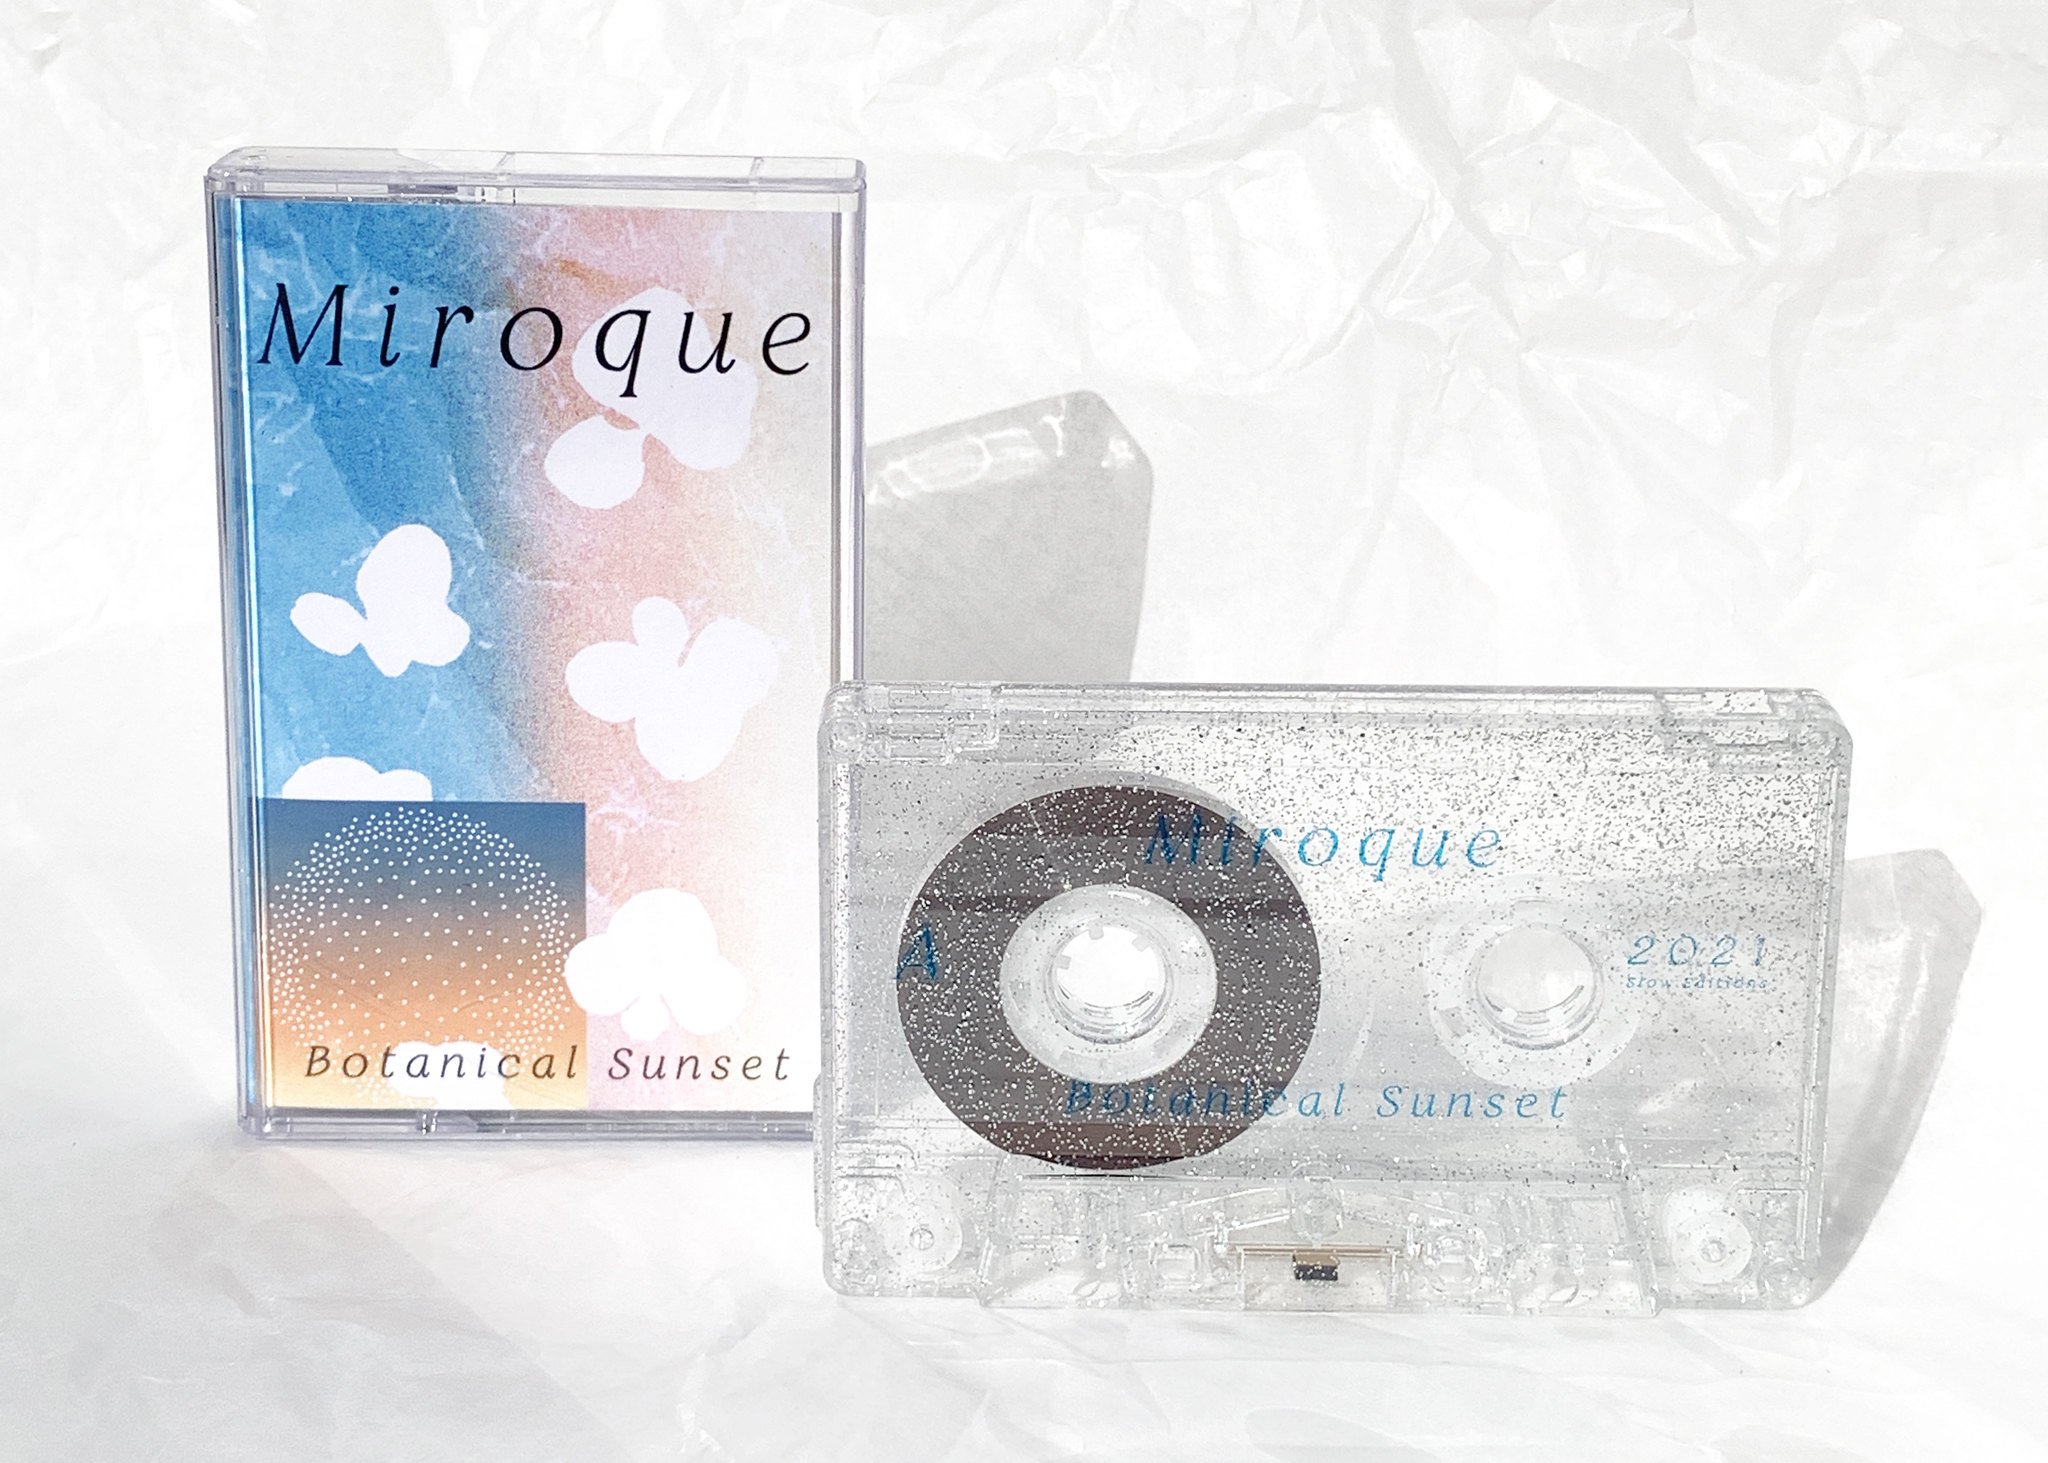  Cassette tape design for Botanical Sunset by Miroque  Reissue by Slow Editions  Art and design by Eunice Luk and Alicia Nauta Reissue supervised by Masahiro Takahashi Originally released by 360° Records, Japan in 2001  2021 